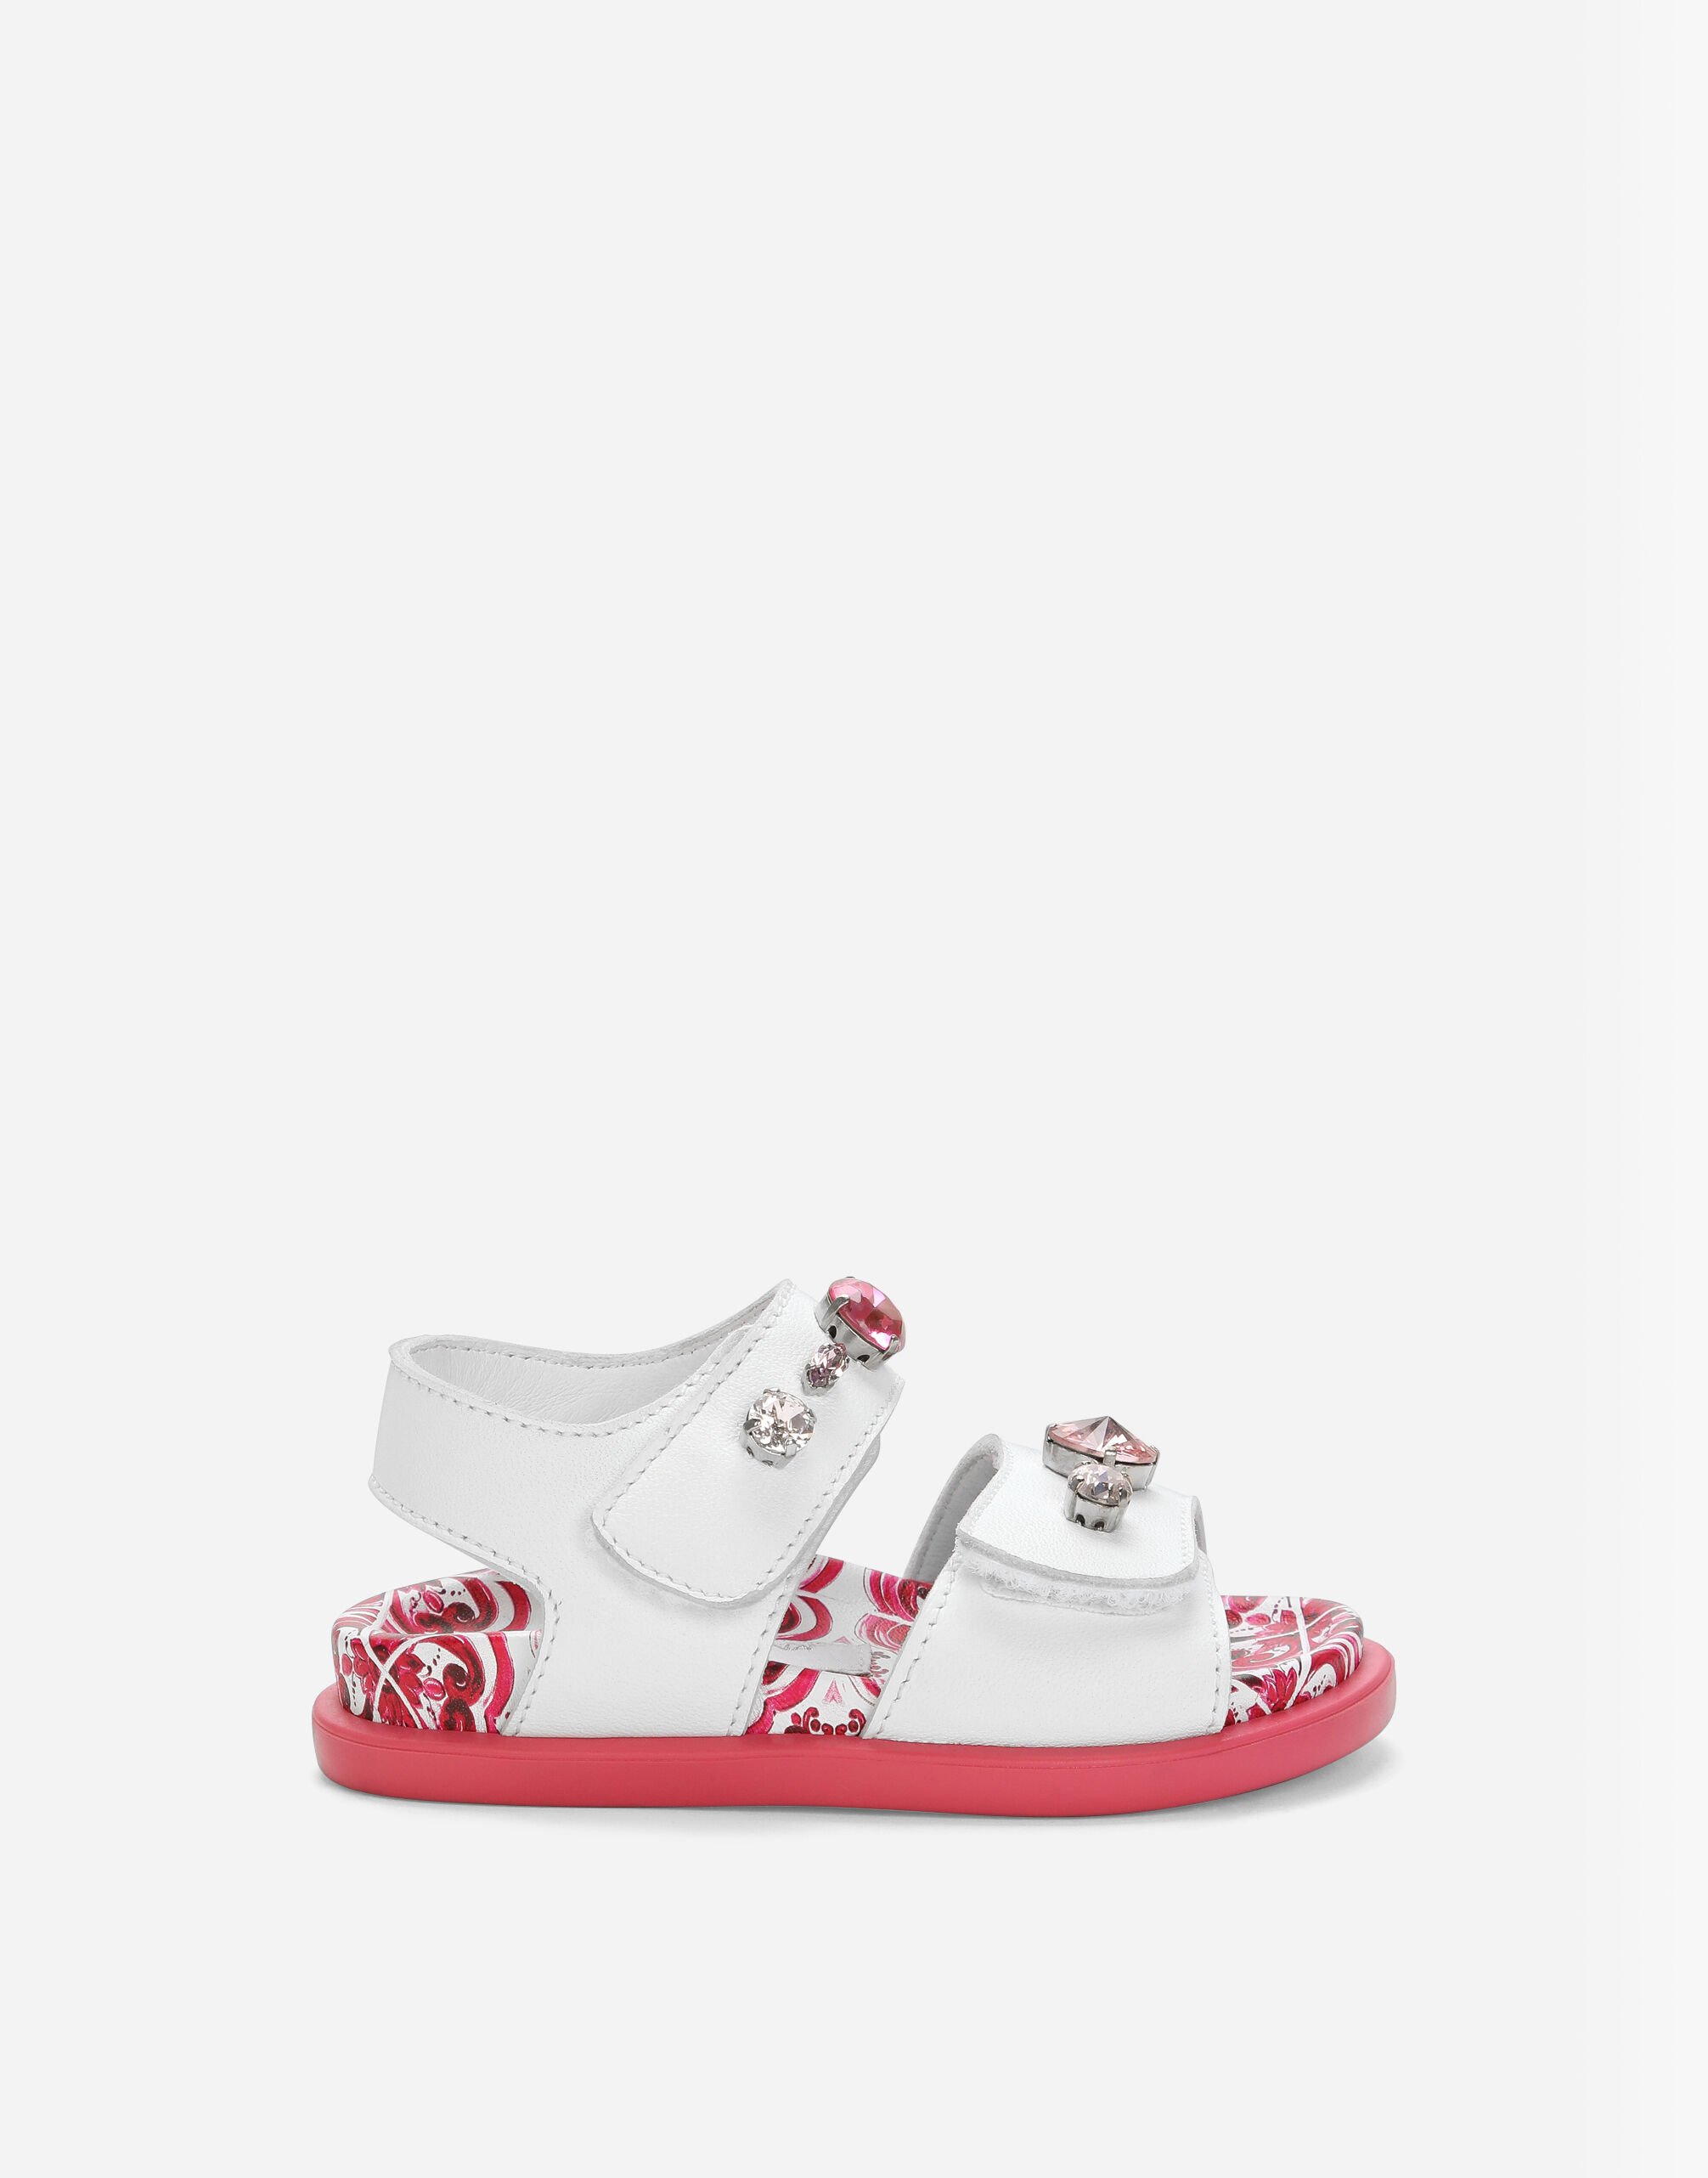 Dolce & Gabbana Patent leather sandals with embellishment Pink D20082A1328